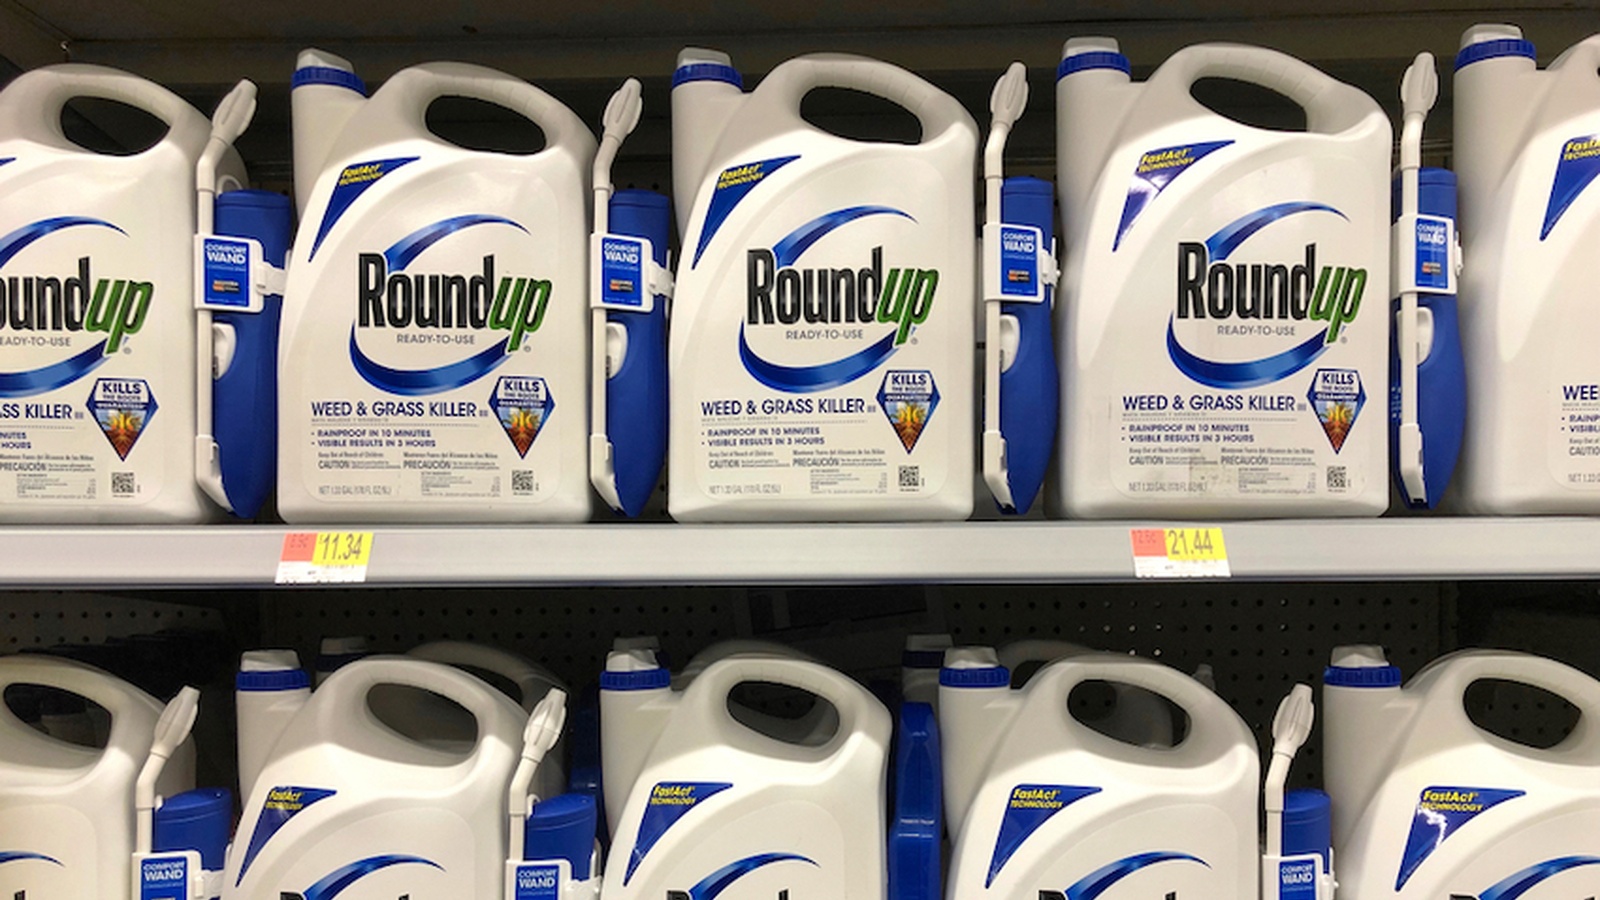 Breaking News: Monsanto Weedkiller Roundup Was ‘Substantial Factor’ in Causing Man’s Cancer